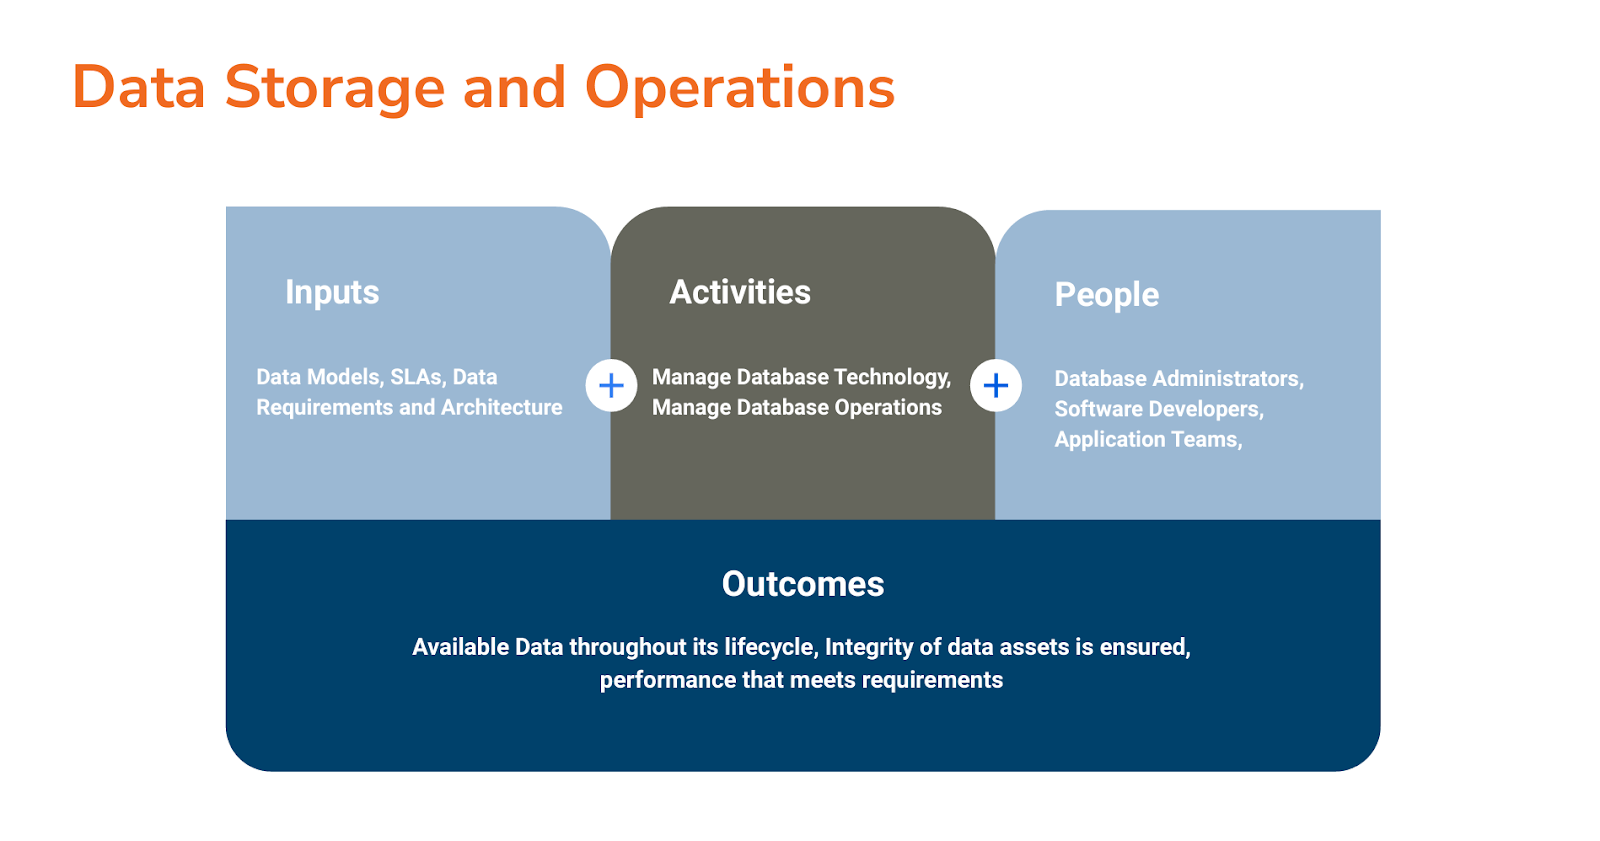 Image showing how inputs combine with activities and people to drive outcomes in a data storage and ops model.